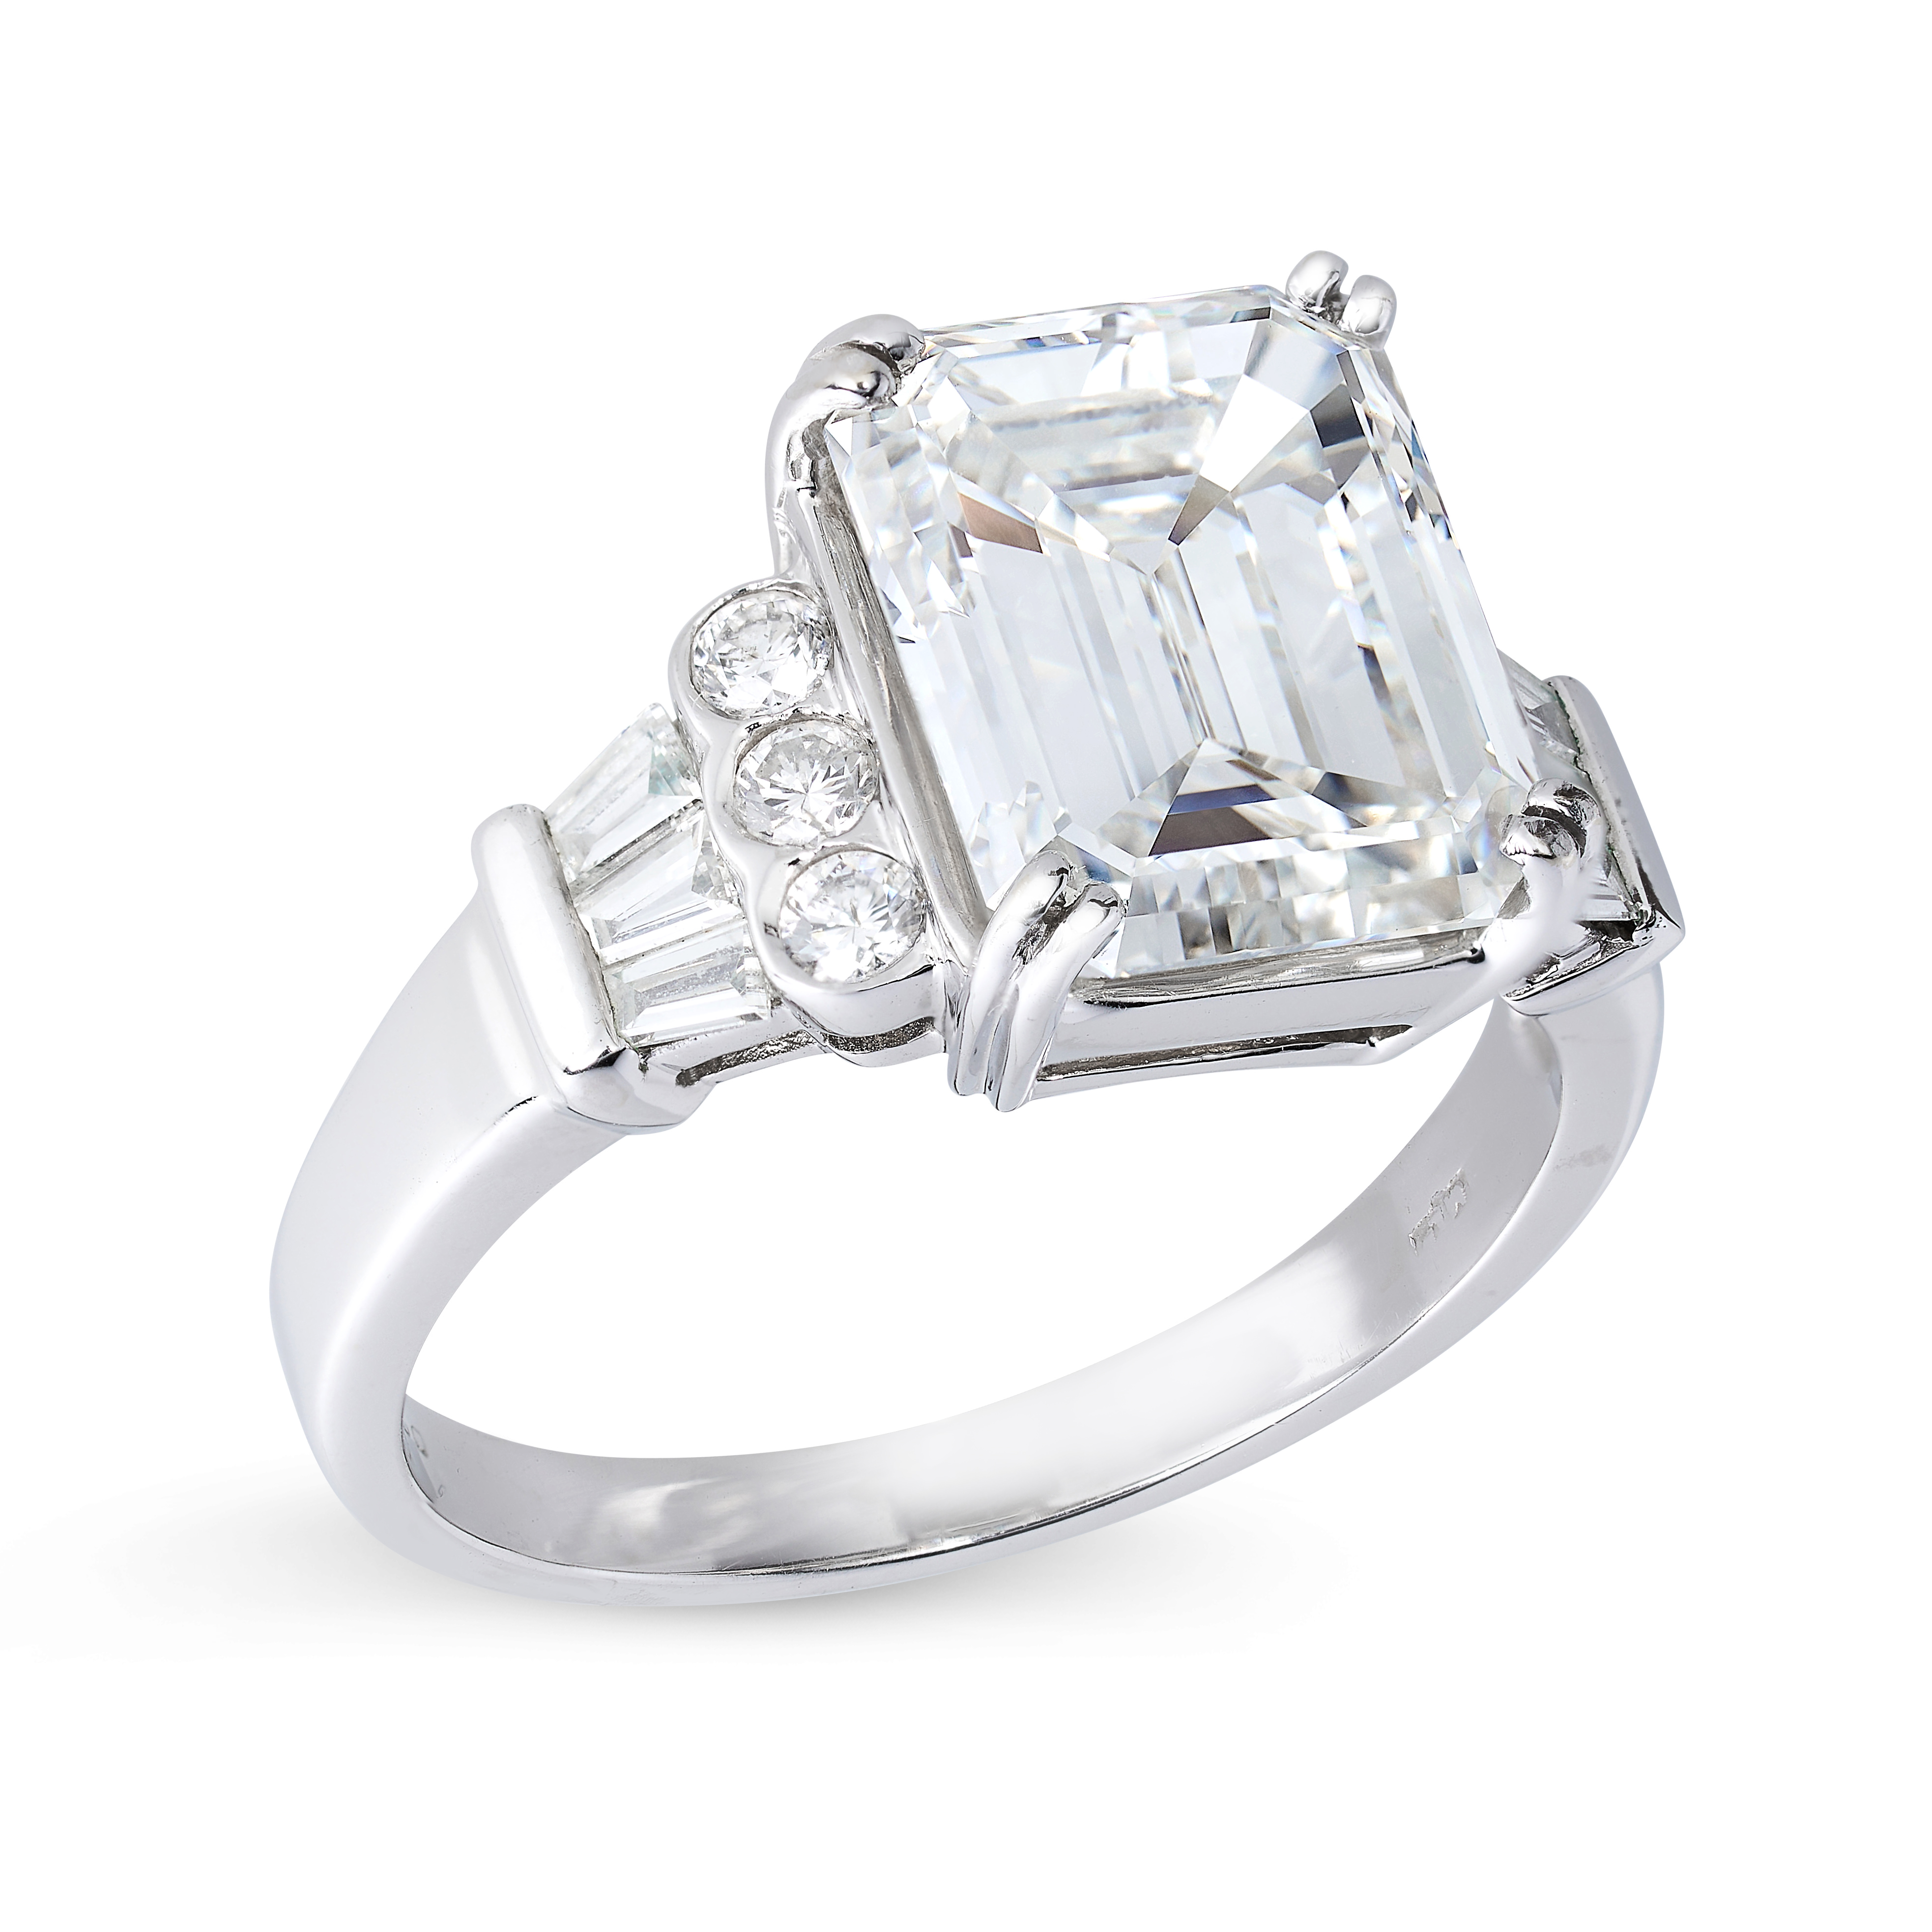 A 5.15 CARAT DIAMOND ENGAGEMENT RING in 18ct white gold, set with an emerald cut diamond of 5.15 - Image 2 of 2